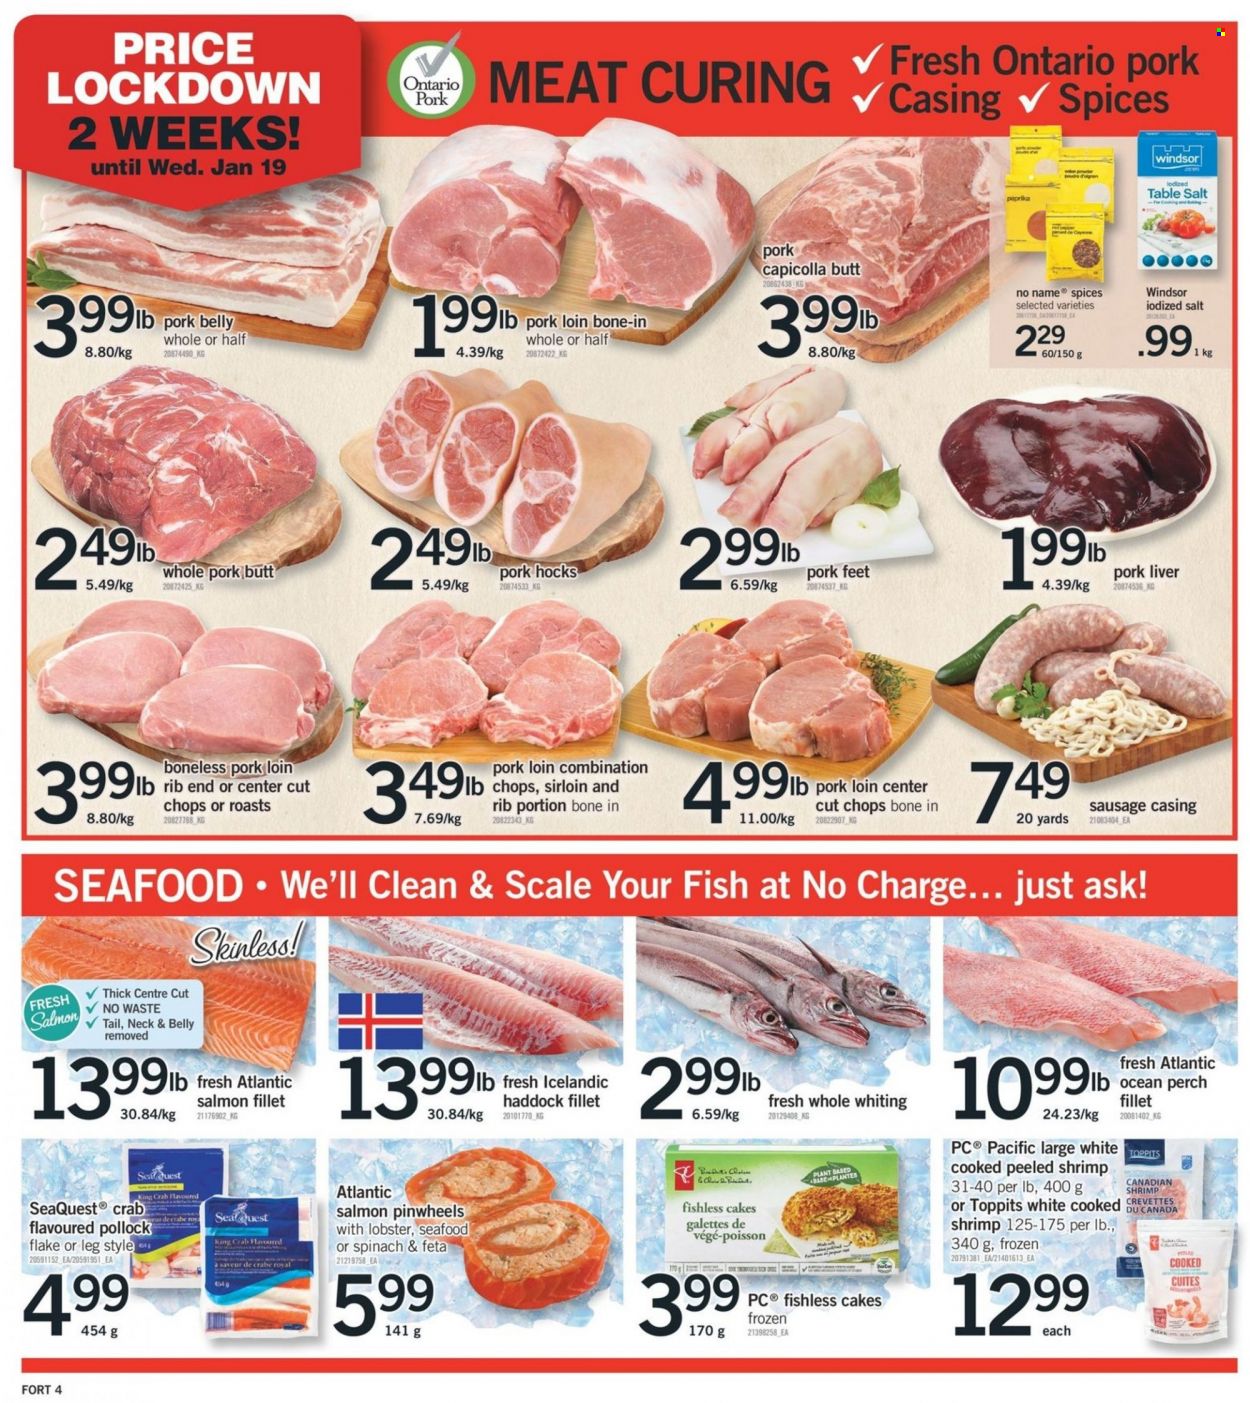 thumbnail - Fortinos Flyer - January 13, 2022 - January 19, 2022 - Sales products - scale, cake, lobster, salmon, salmon fillet, haddock, king crab, pollock, perch, seafood, crab, fish, whiting, No Name, sausage, pork belly, pork hock, pork liver, pork loin, pork meat. Page 4.